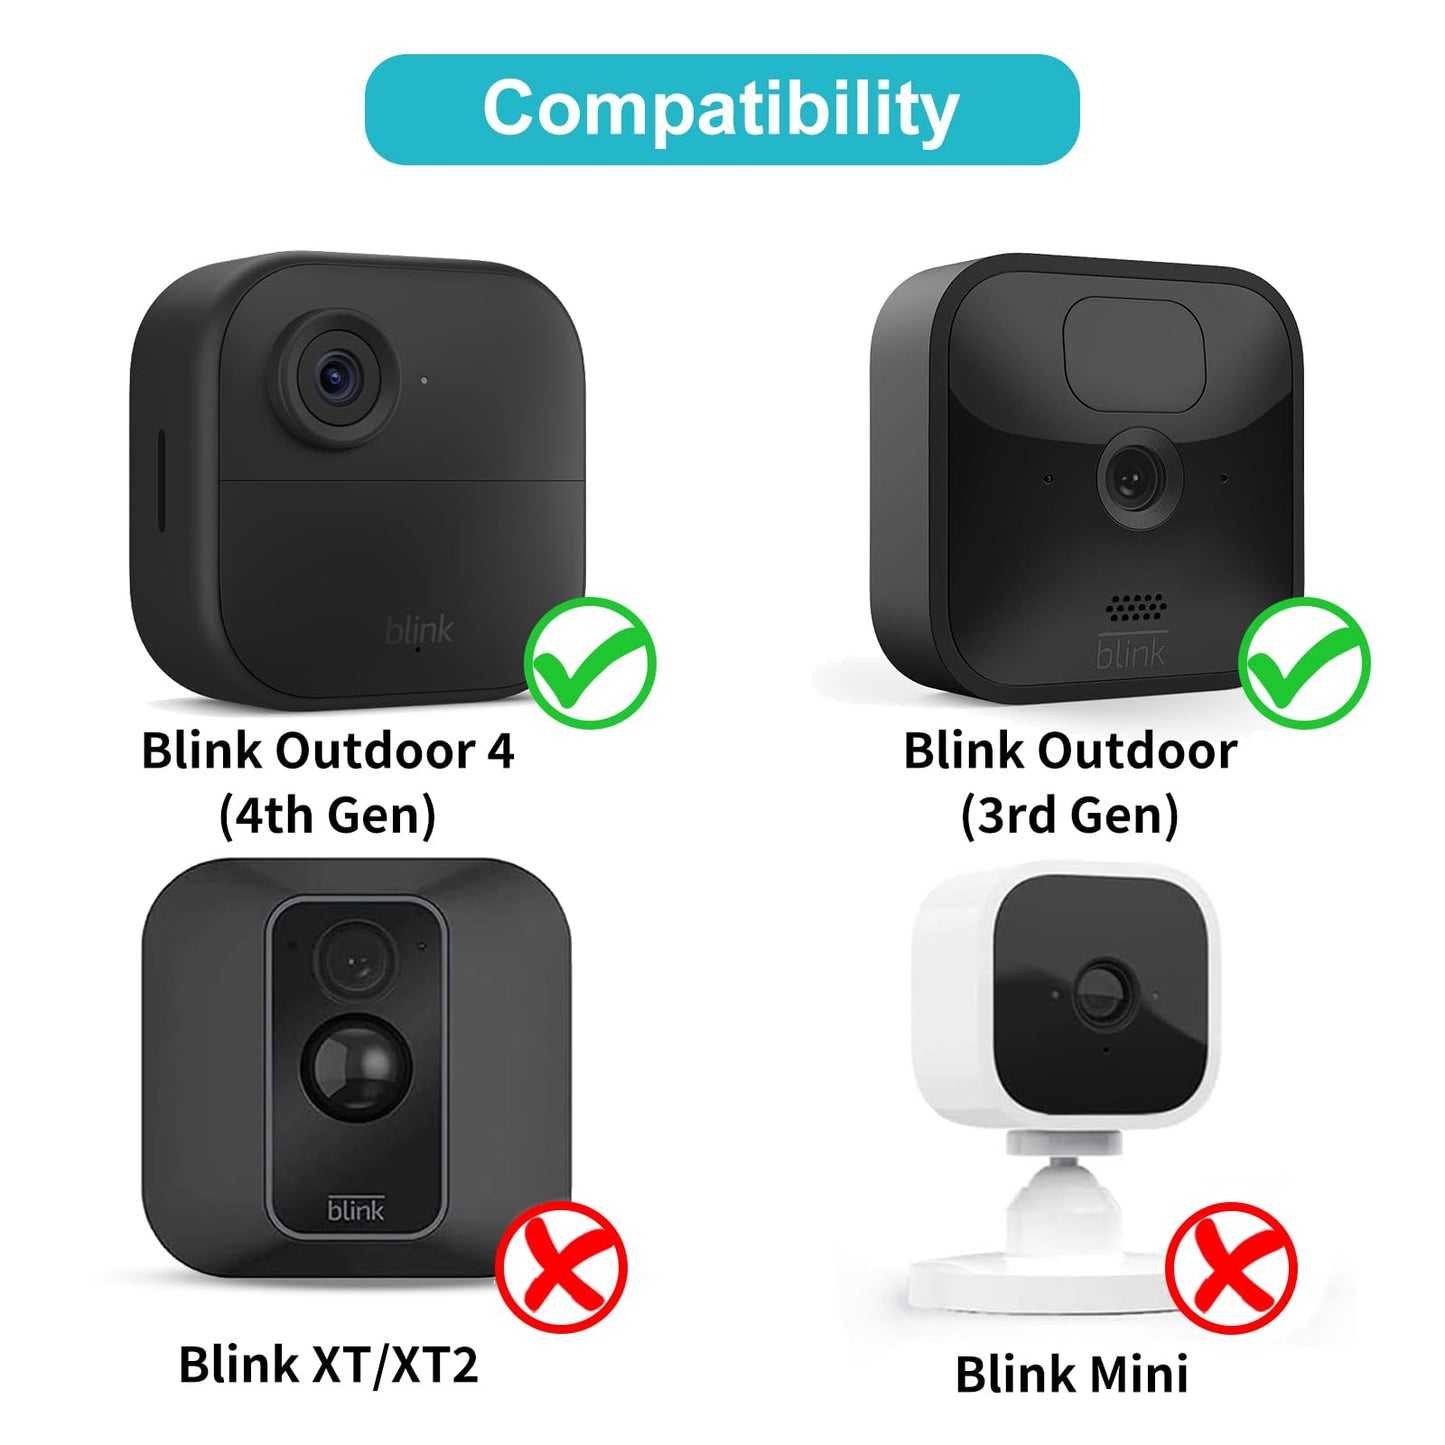 Blink Outdoor 4 (4th Gen) Camera Mount, Weatherproof Protective Housing and 360° Adjustable Mount with Sync Module 2 Mount for Blink Outdoor Security Camera System (Black, 2 Pack)